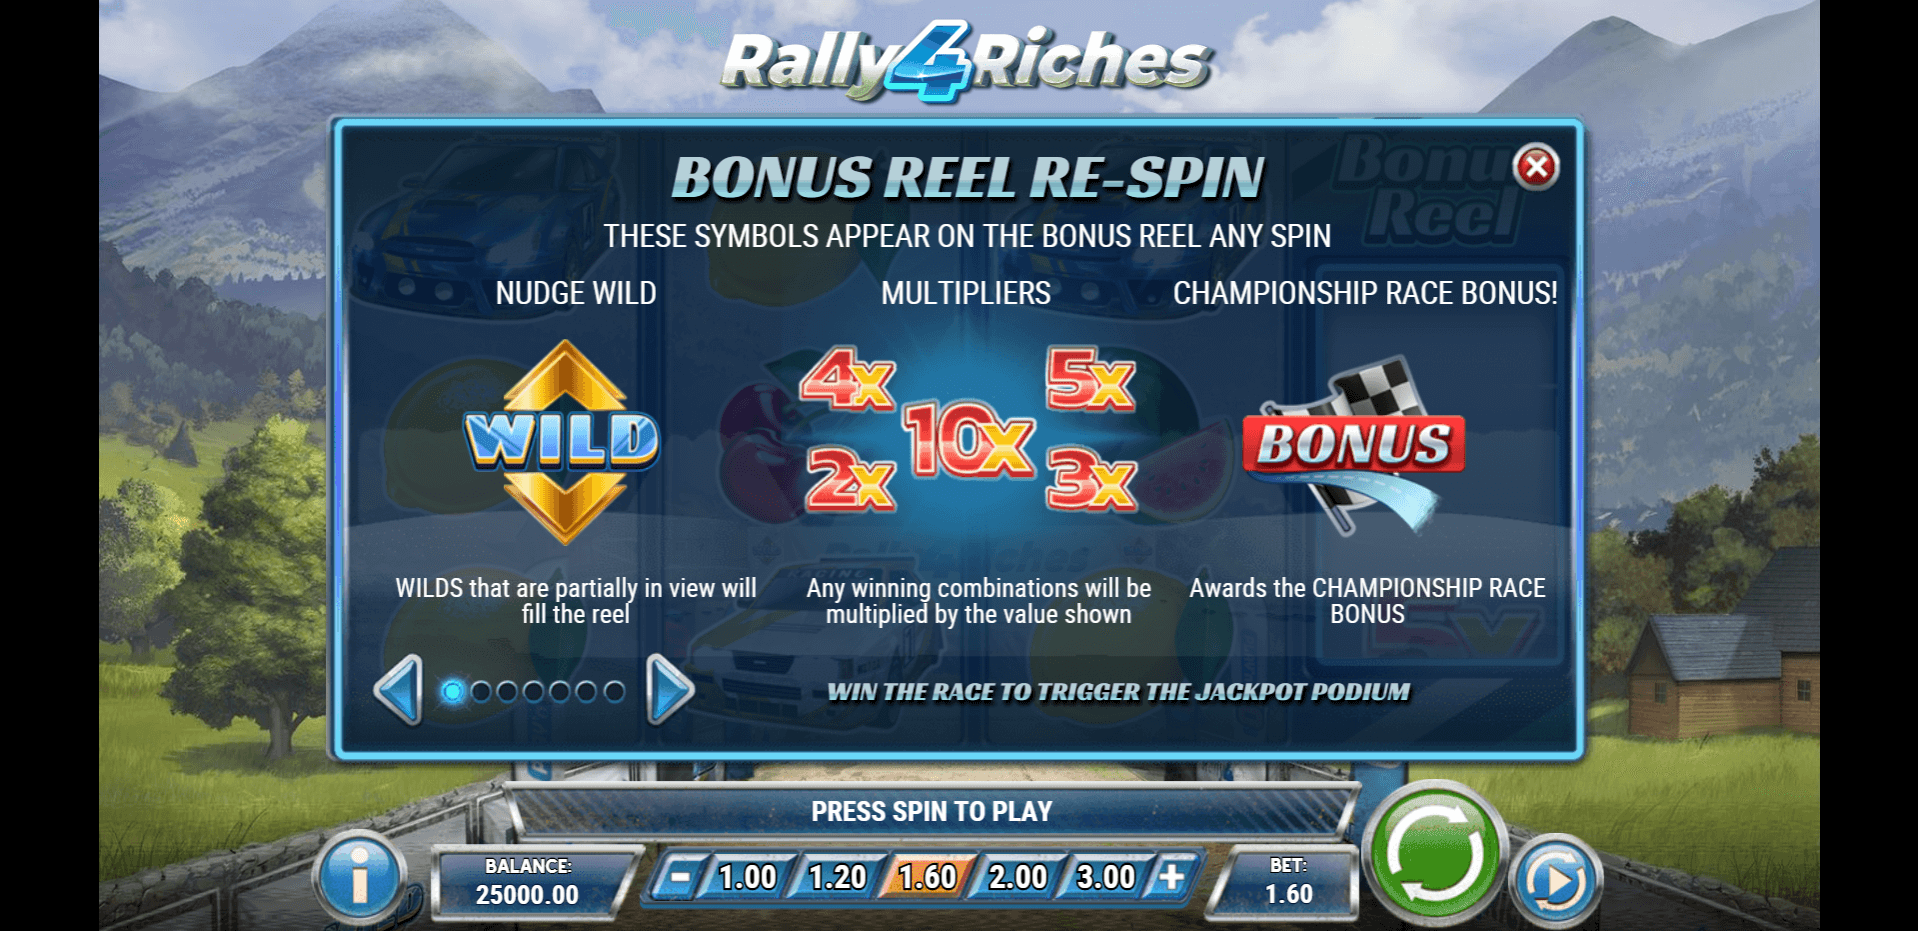 rally 4 riches slot machine detail image 0